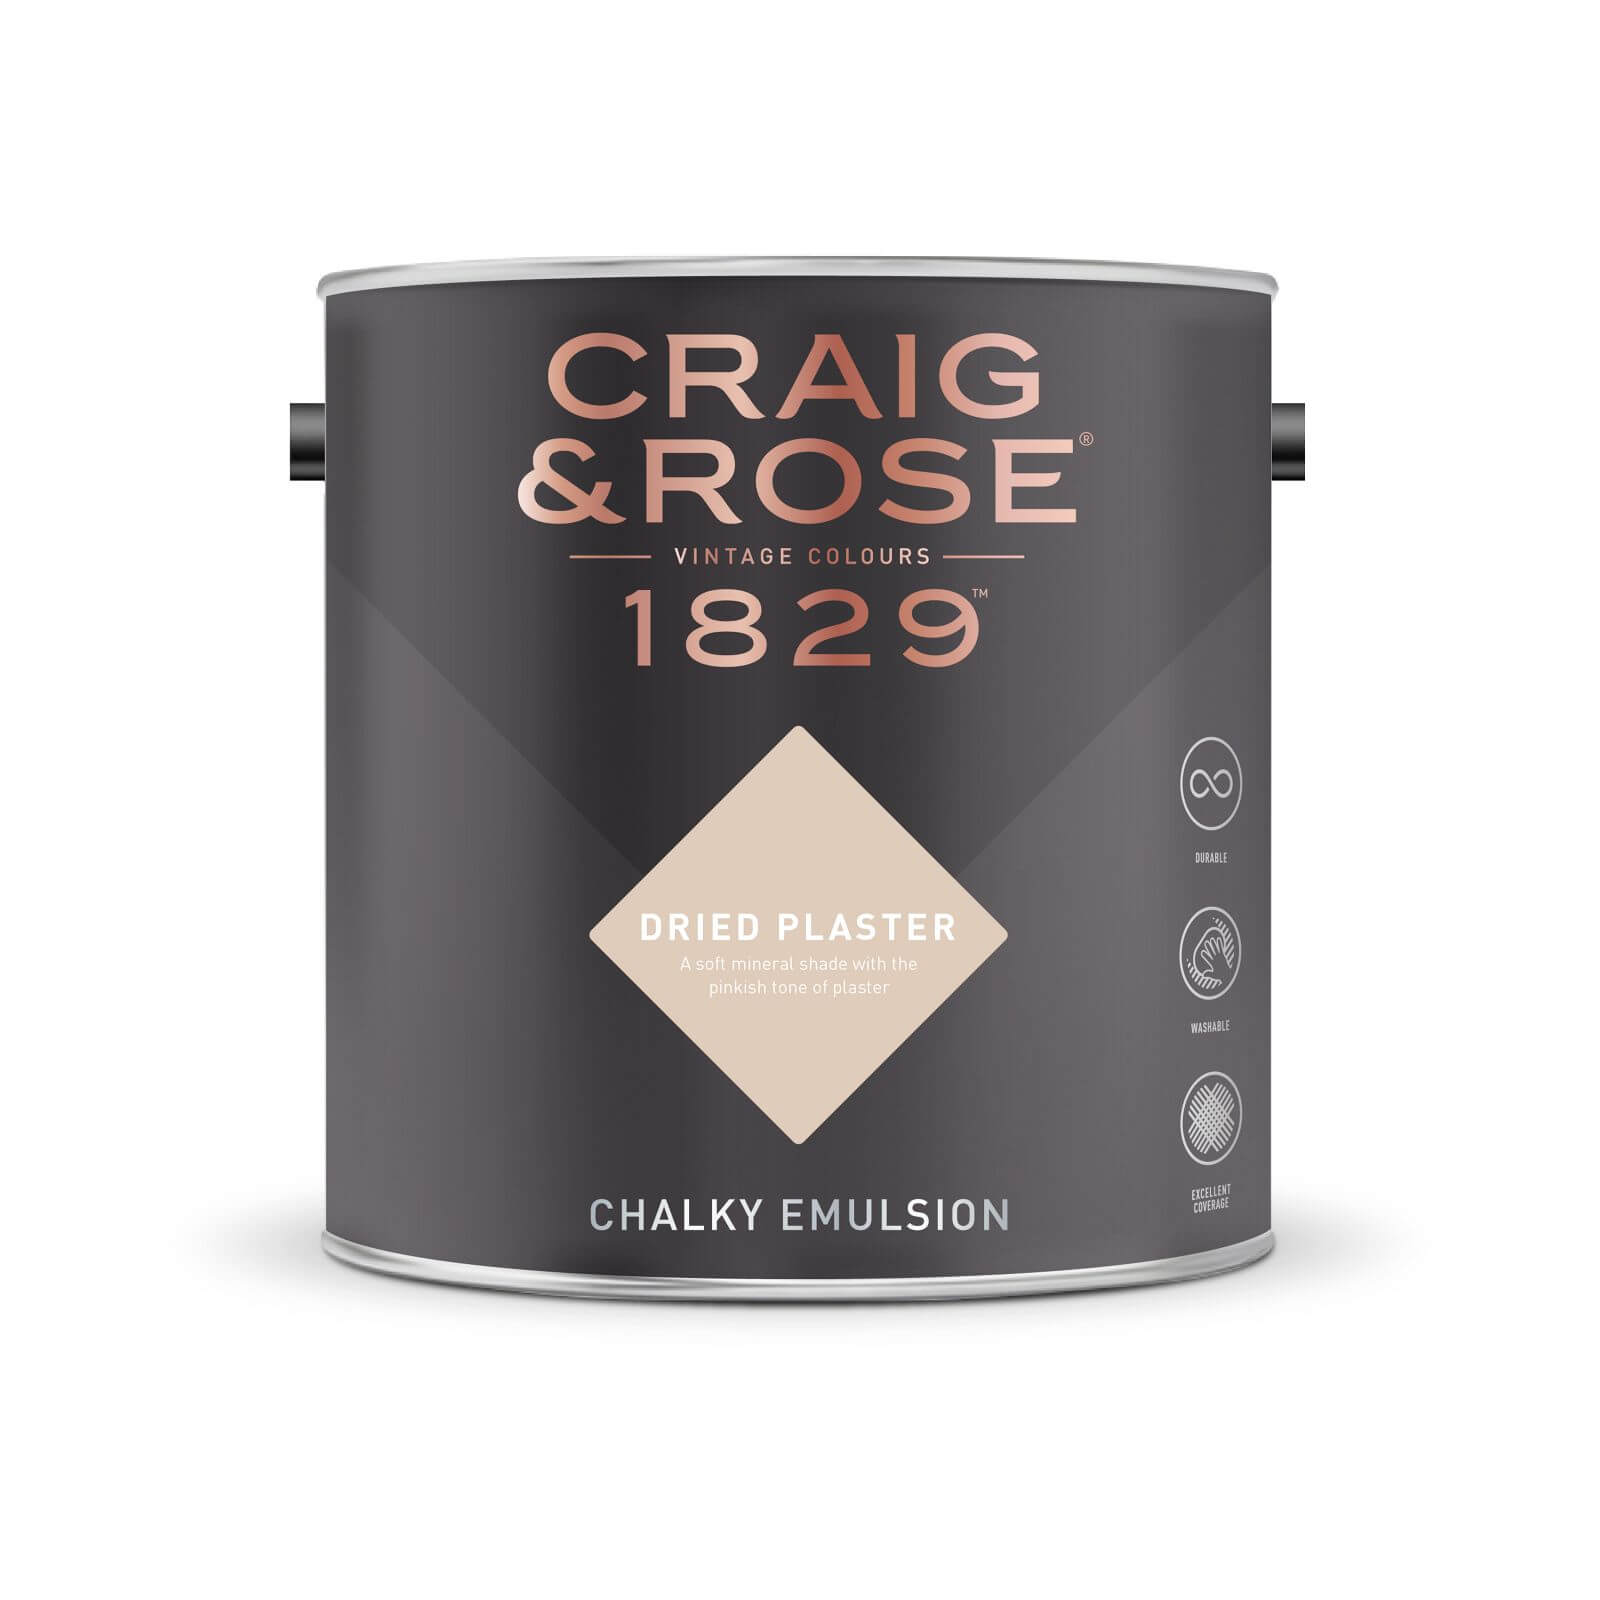 Craig & Rose 1829 Chalky Emulsion Paint Dried Plaster - 5L